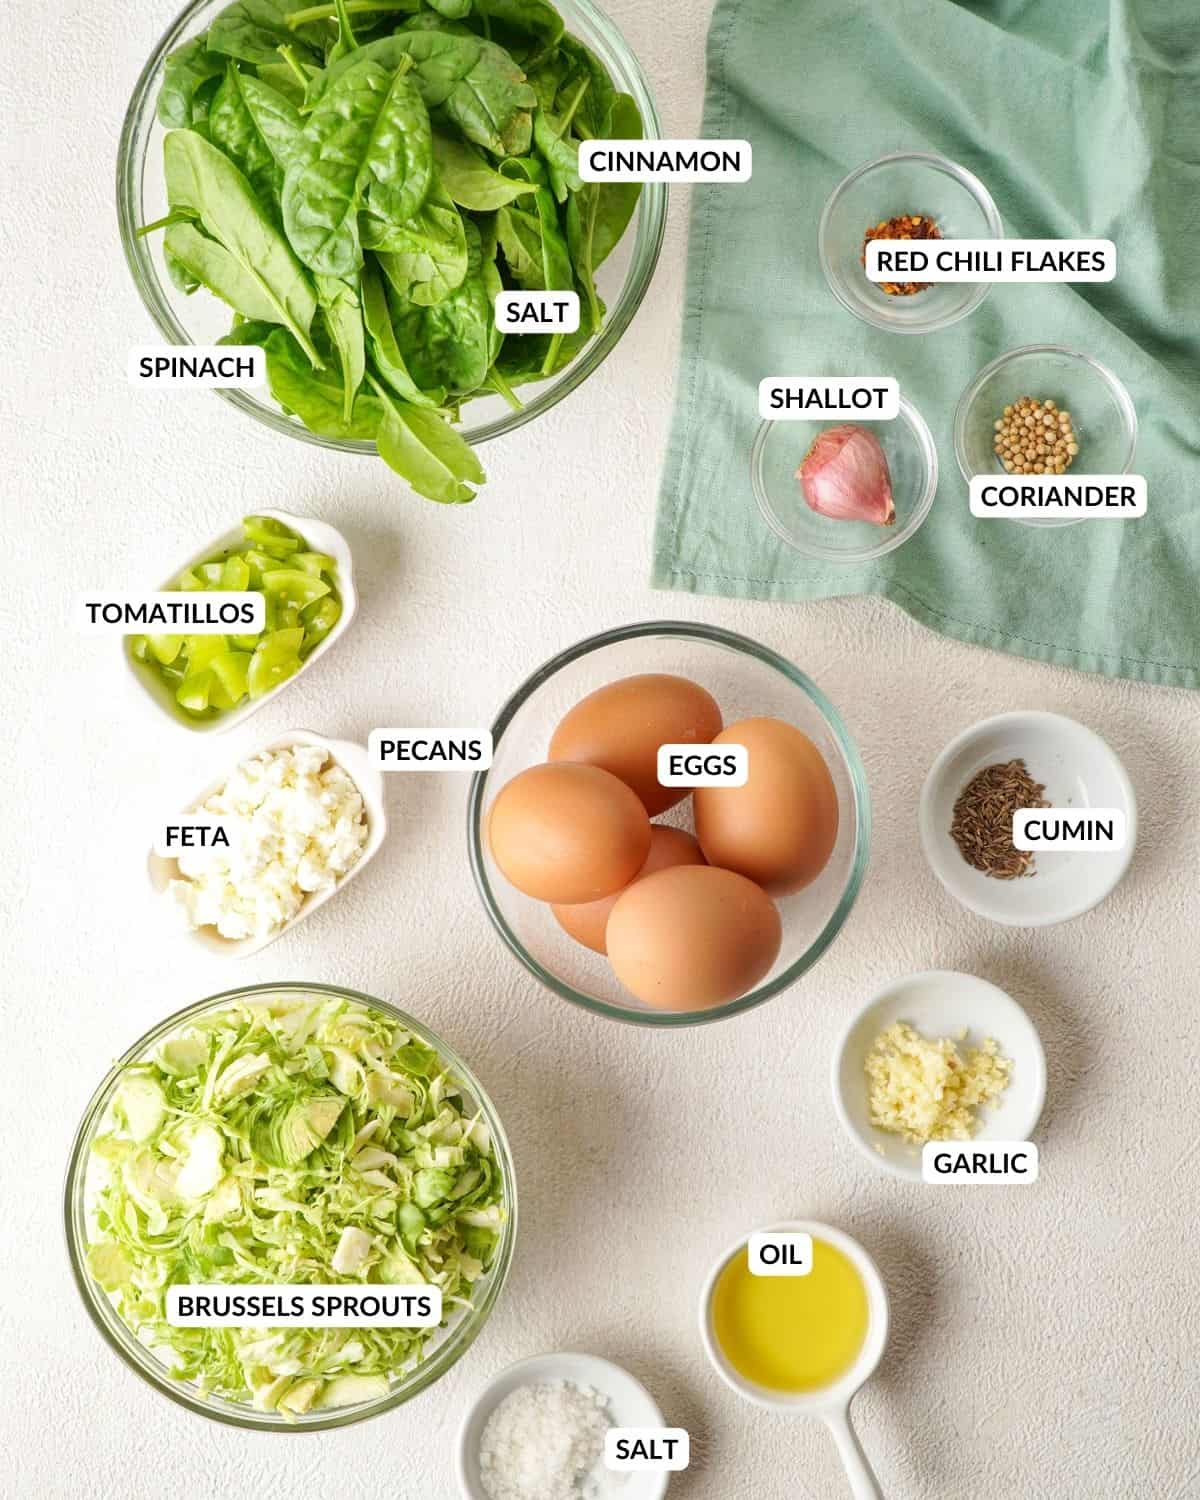 Overhead view of labeled ingredients - check recipe card for details